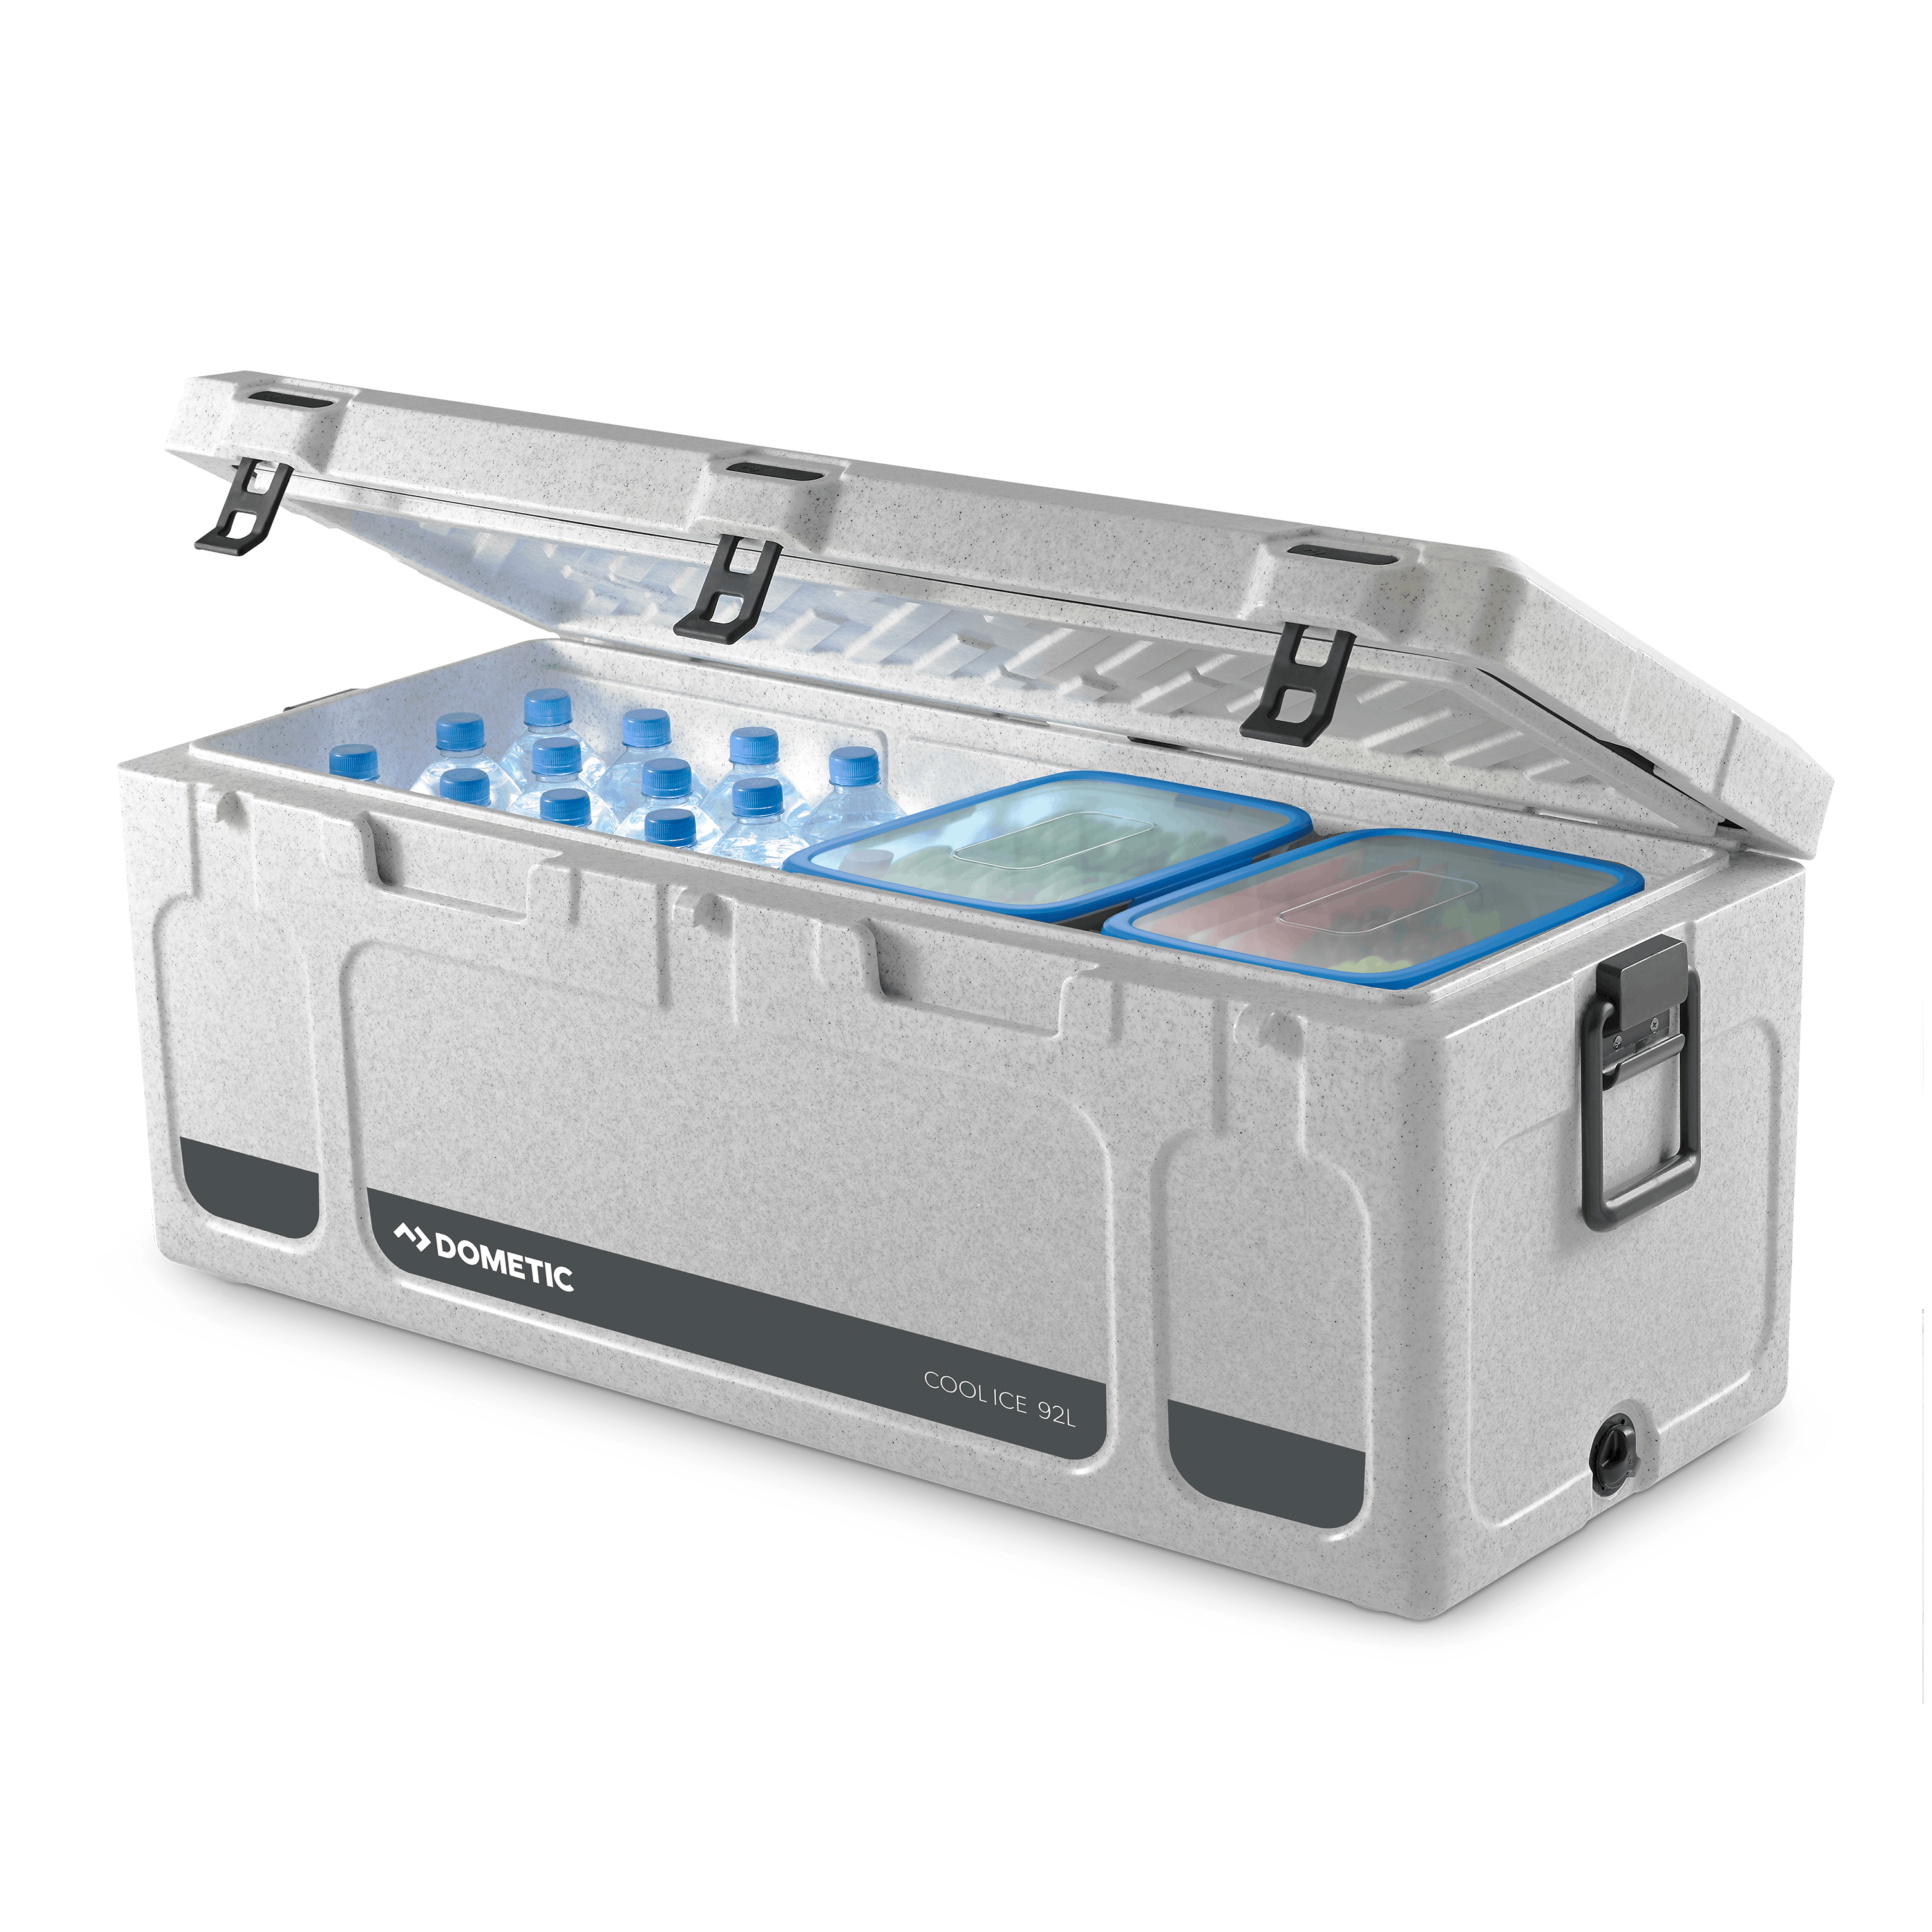 Dometic Cool-Ice Heavy Duty Ice Box 92L - Cooler Boxes - Cooler Boxes &  Bags - Sports & Outdoors - Home & Outdoor Living at Trade Tested